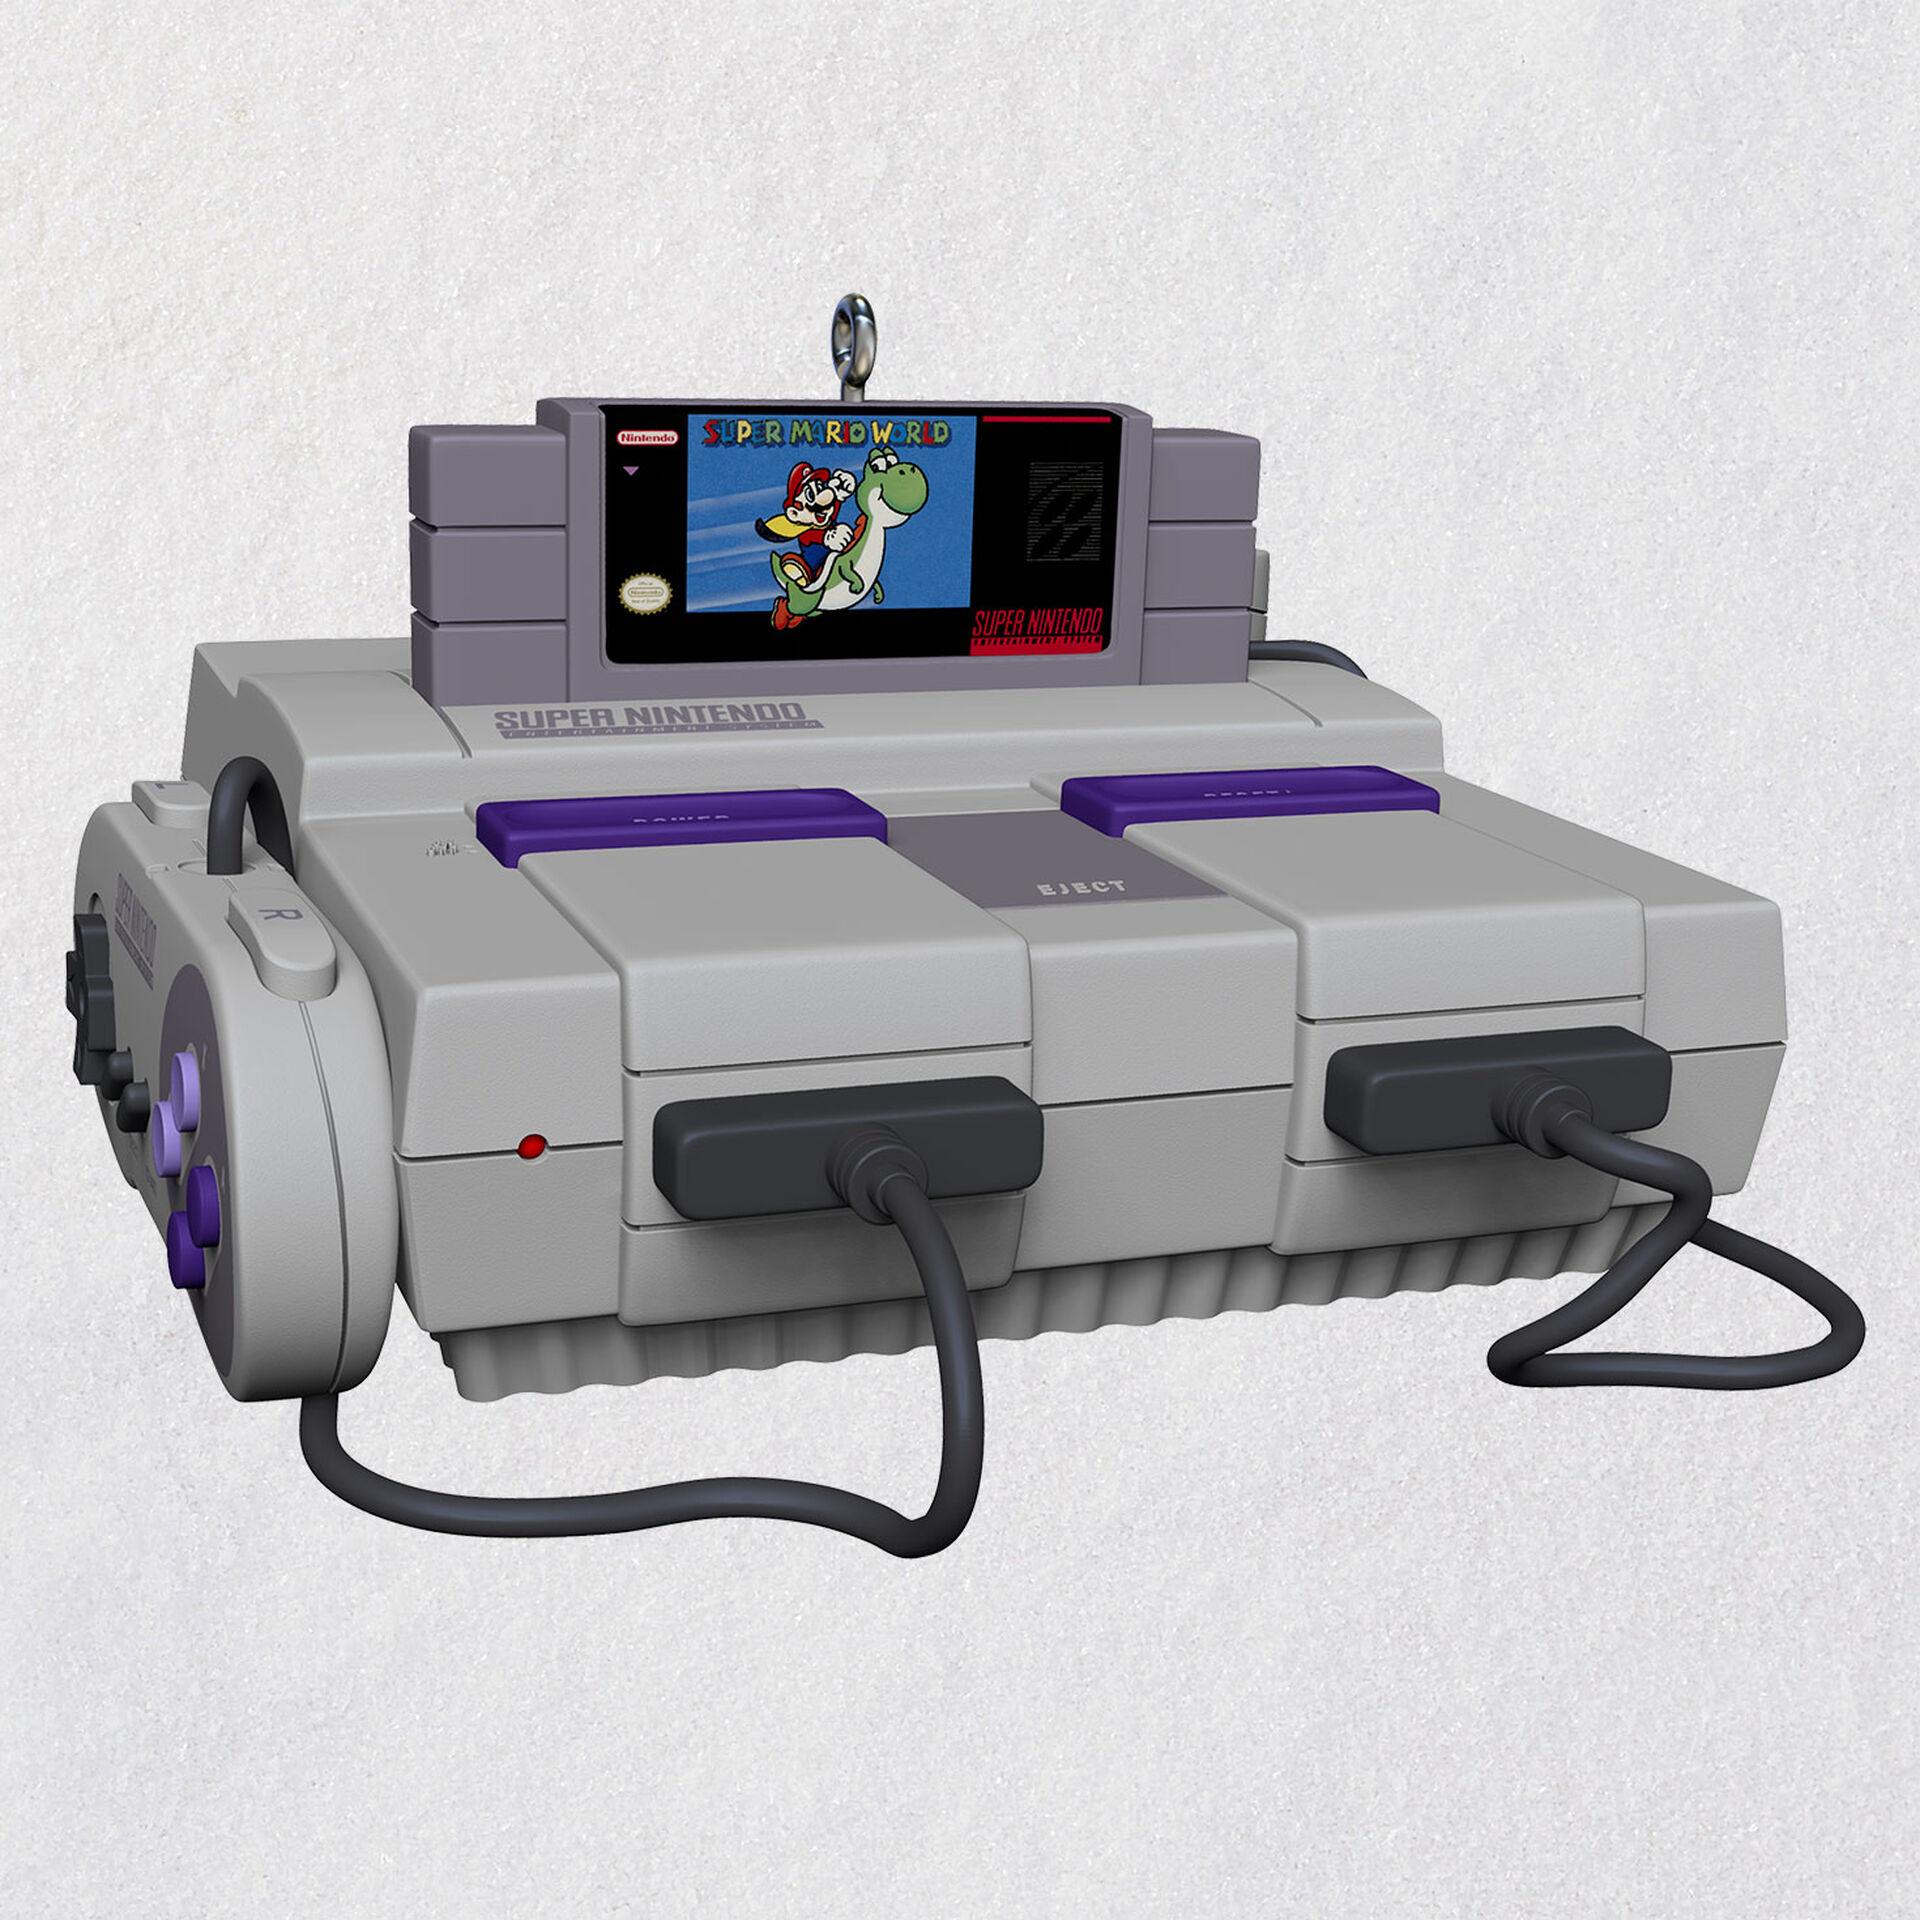 Super Nintendo Entertainment System Console Ornament for $19.99 Shipped